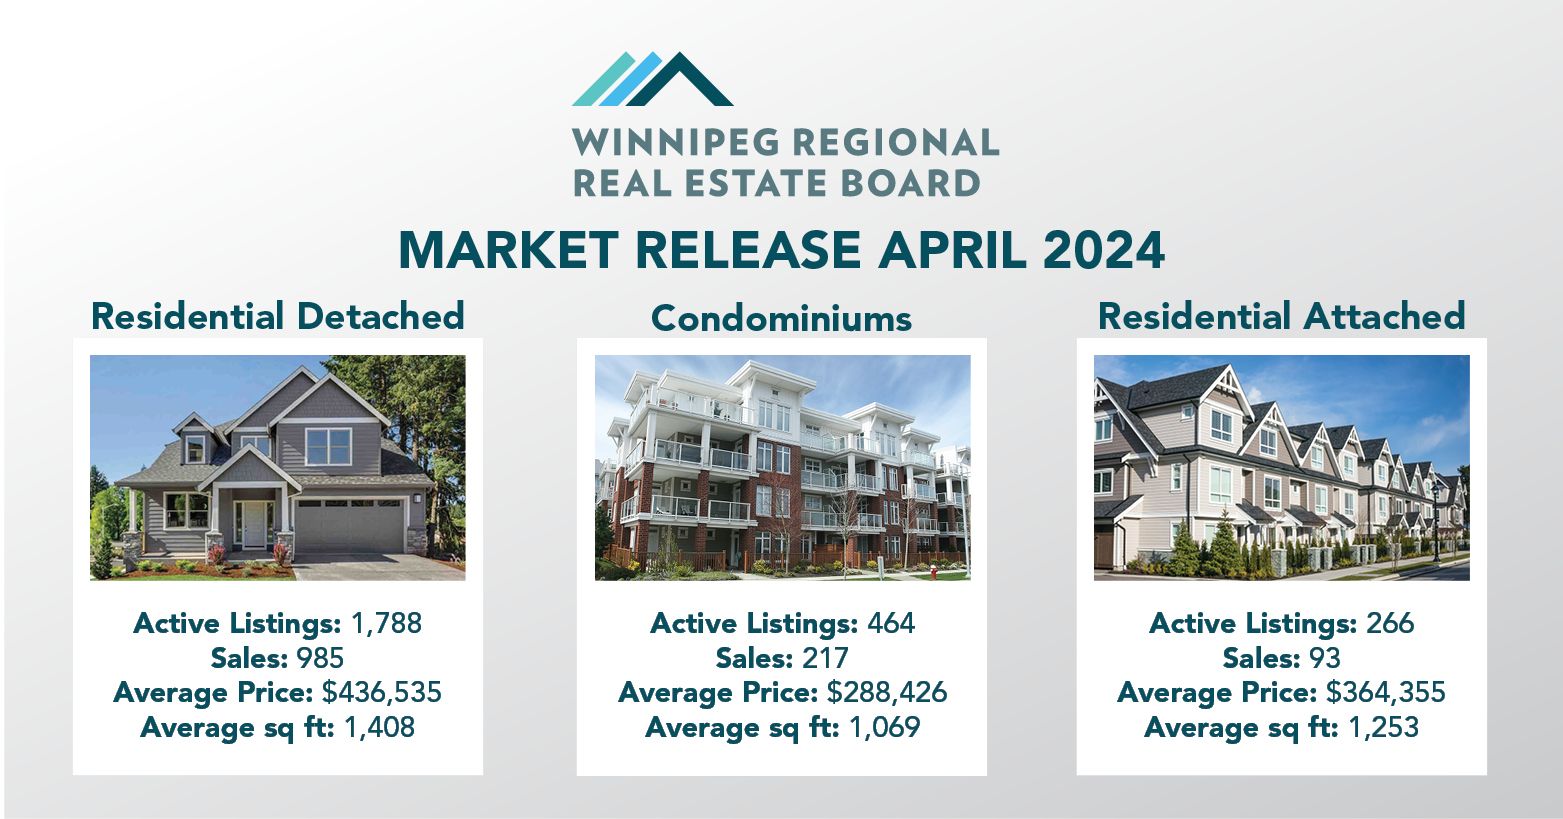 April Springs Upward with Strong Real Estate Market Performance